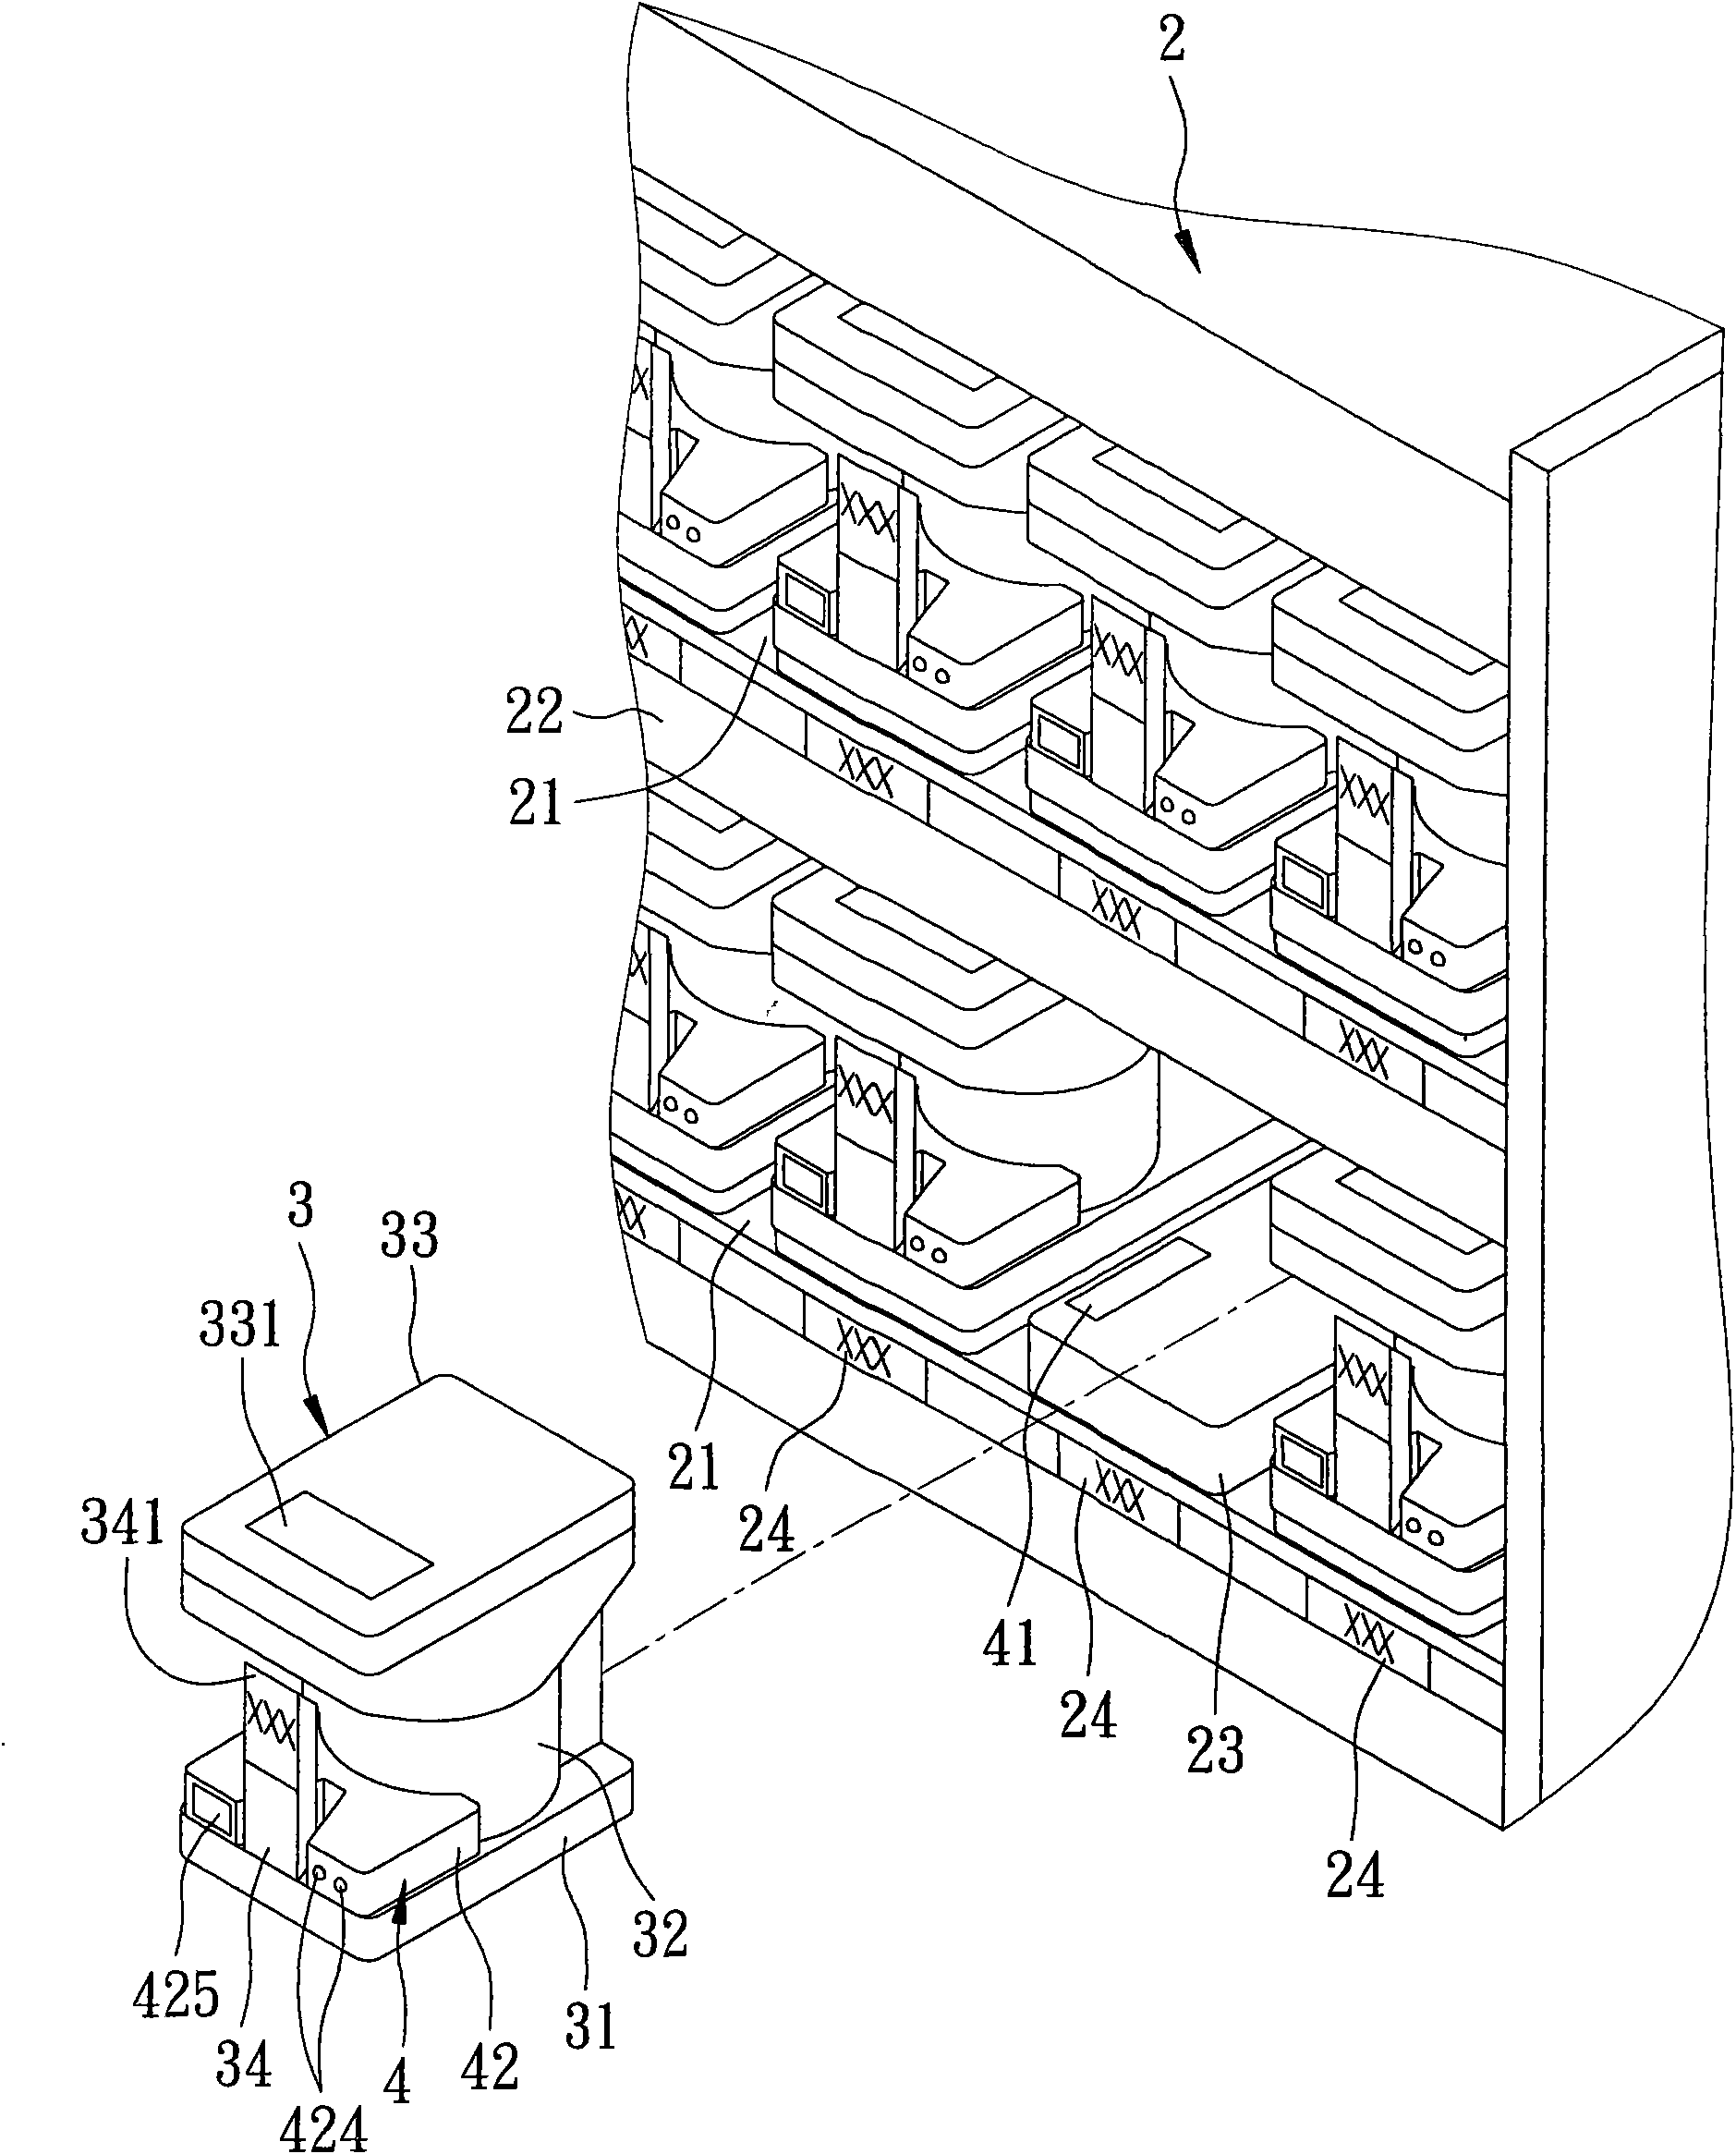 Medicine storage device with detection function